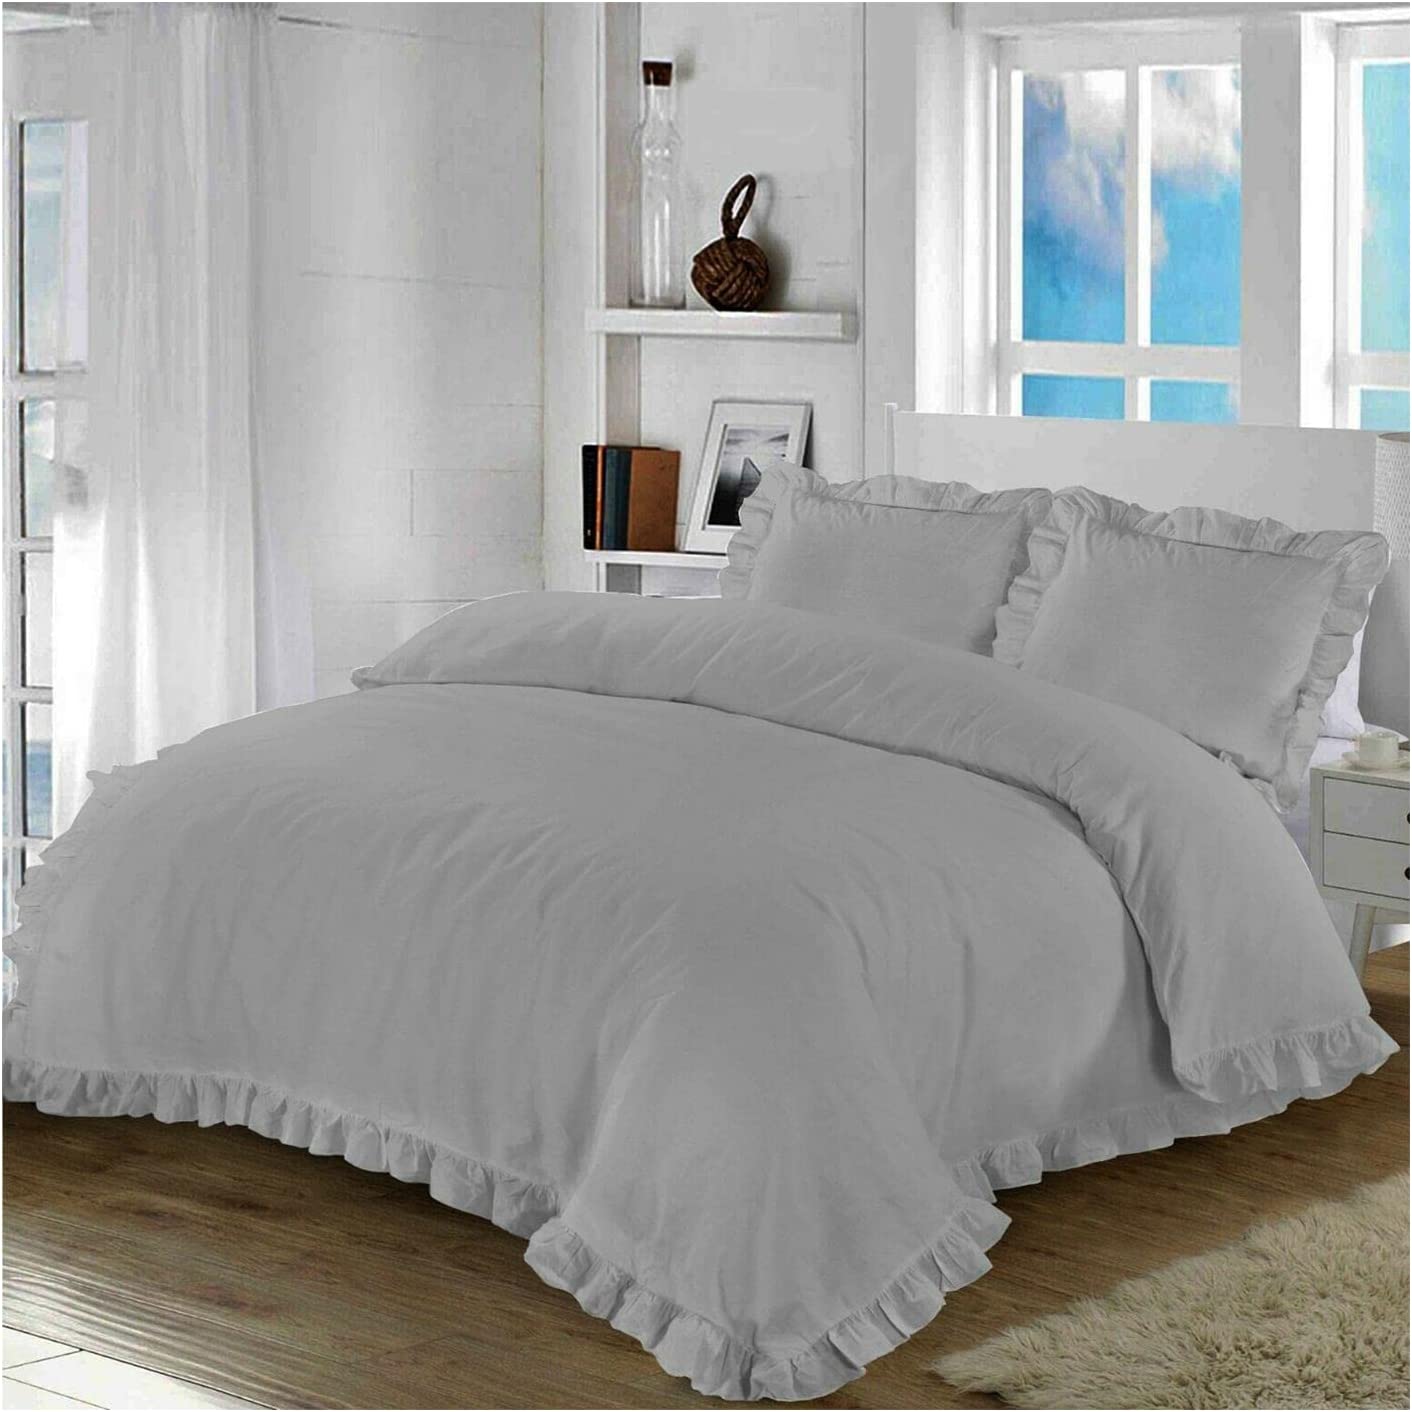 Ruffled Frilled Duvet Cover Set With Pillowcases Polycotton Duvet Quilt Covers Soft Comfy Bedding Set Teal Super King